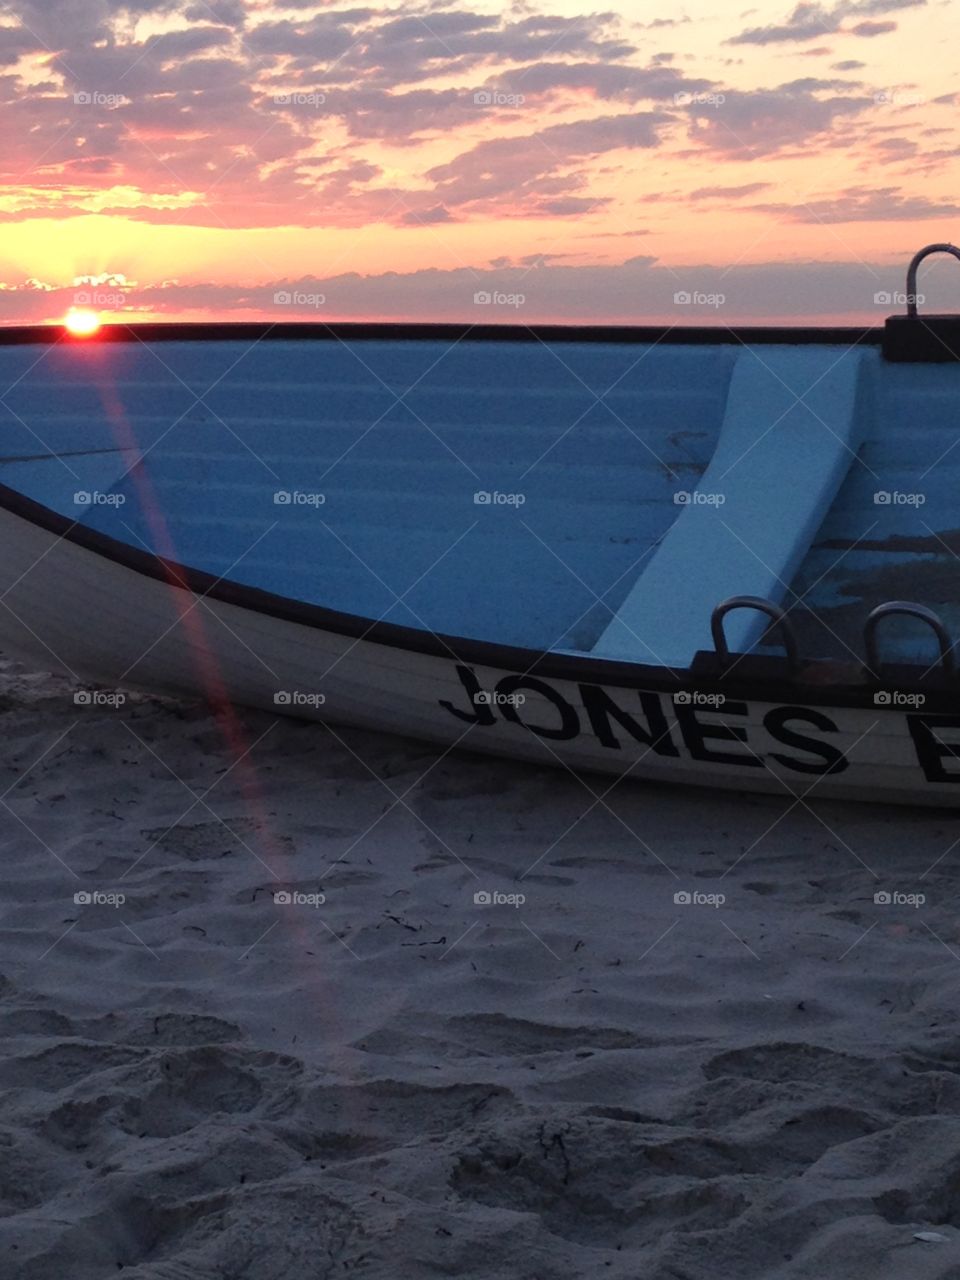 The Row Boat. Photo taken at Jones Beach at the golden hour 